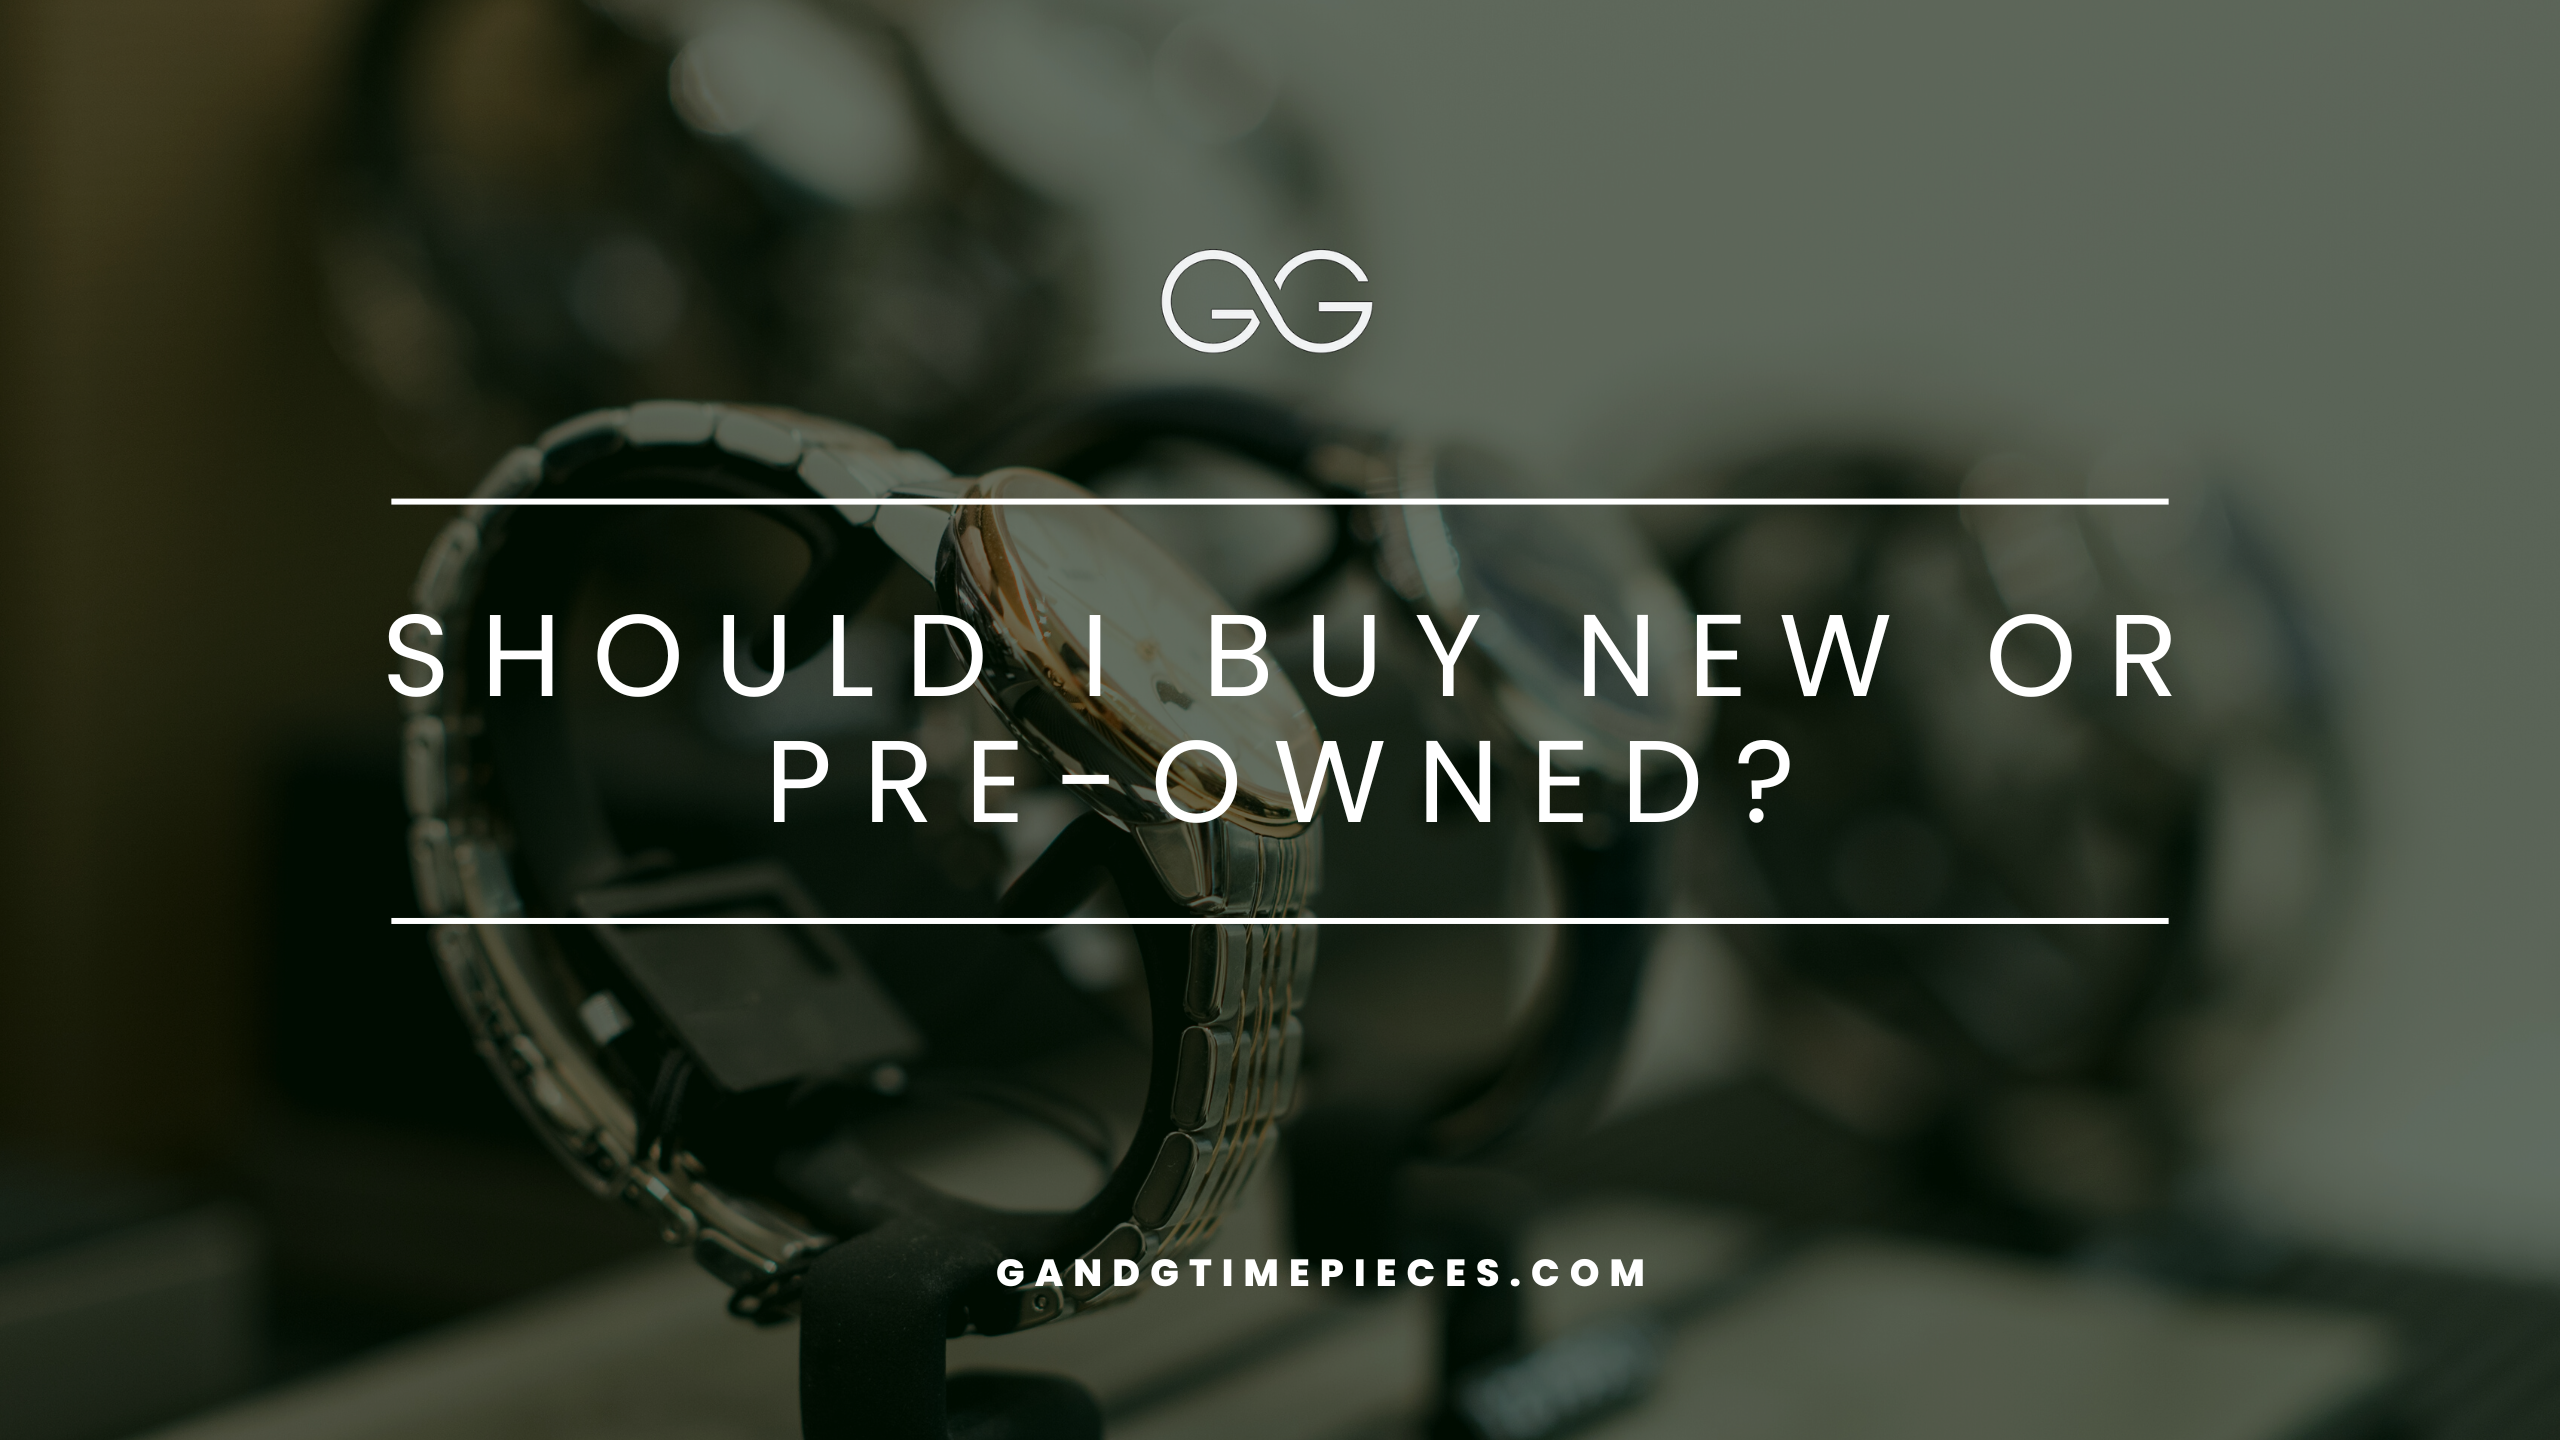 SHOULD I BUY A NEW OR PRE-OWNED LUXURY WATCH?